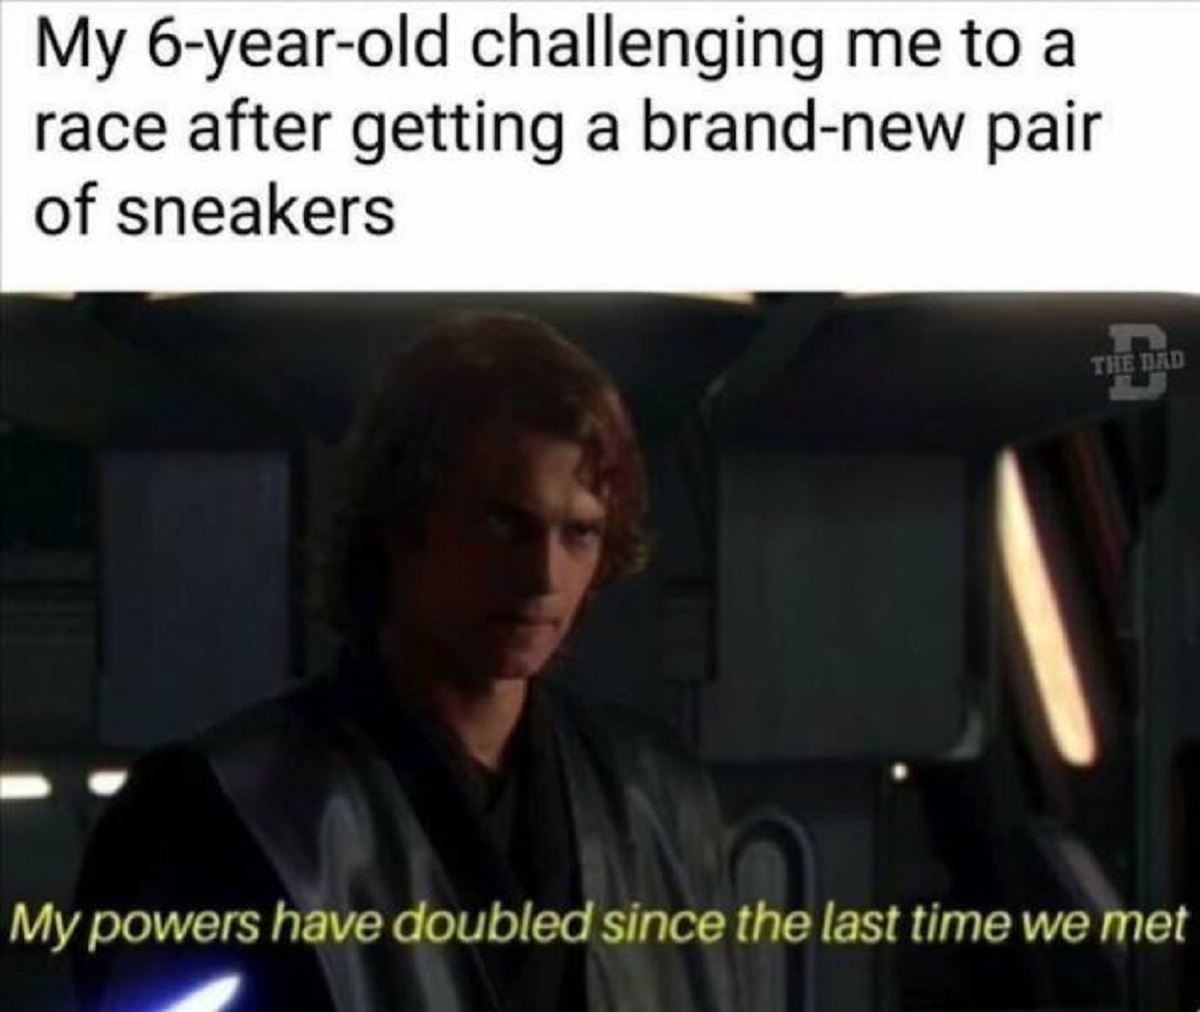 photo caption - My 6yearold challenging me to a race after getting a brandnew pair of sneakers The Dad My powers have doubled since the last time we met